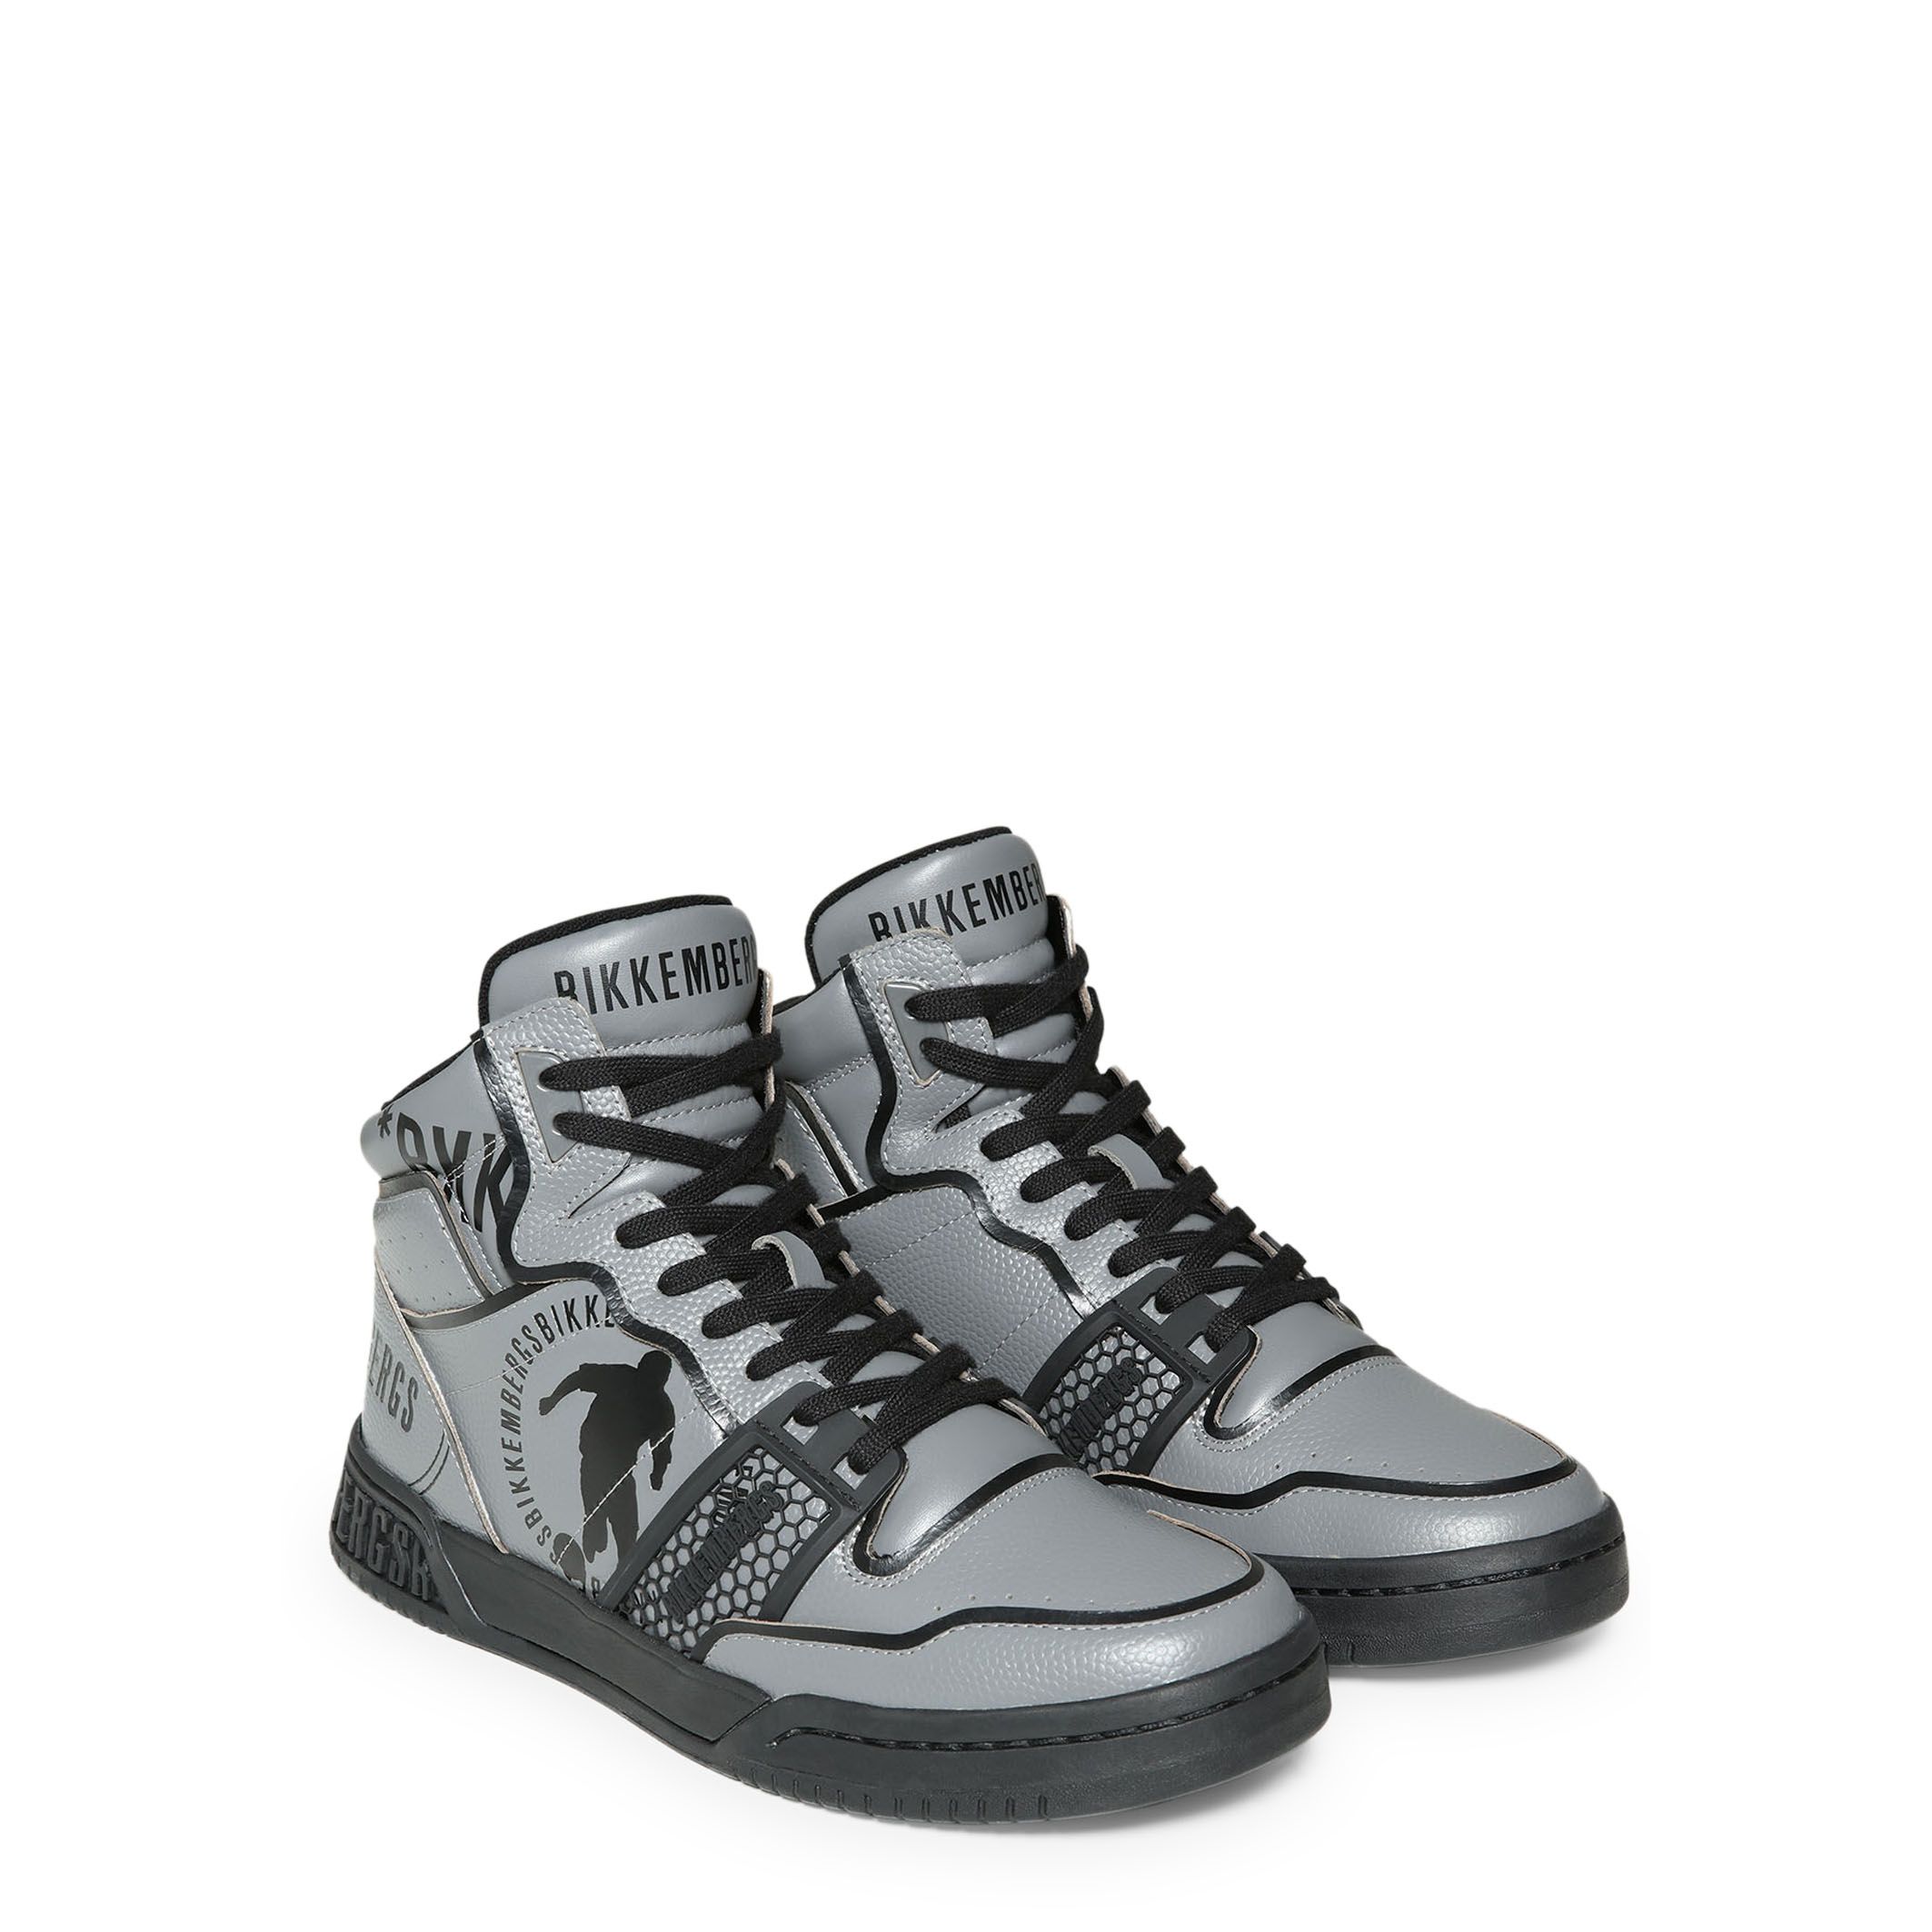 Gender: Man <br> Type: Sneakers <br> Upper: synthetic material, leather <br> Internal lining: synthetic material <br> Sole: rubber <br> Details: round toe